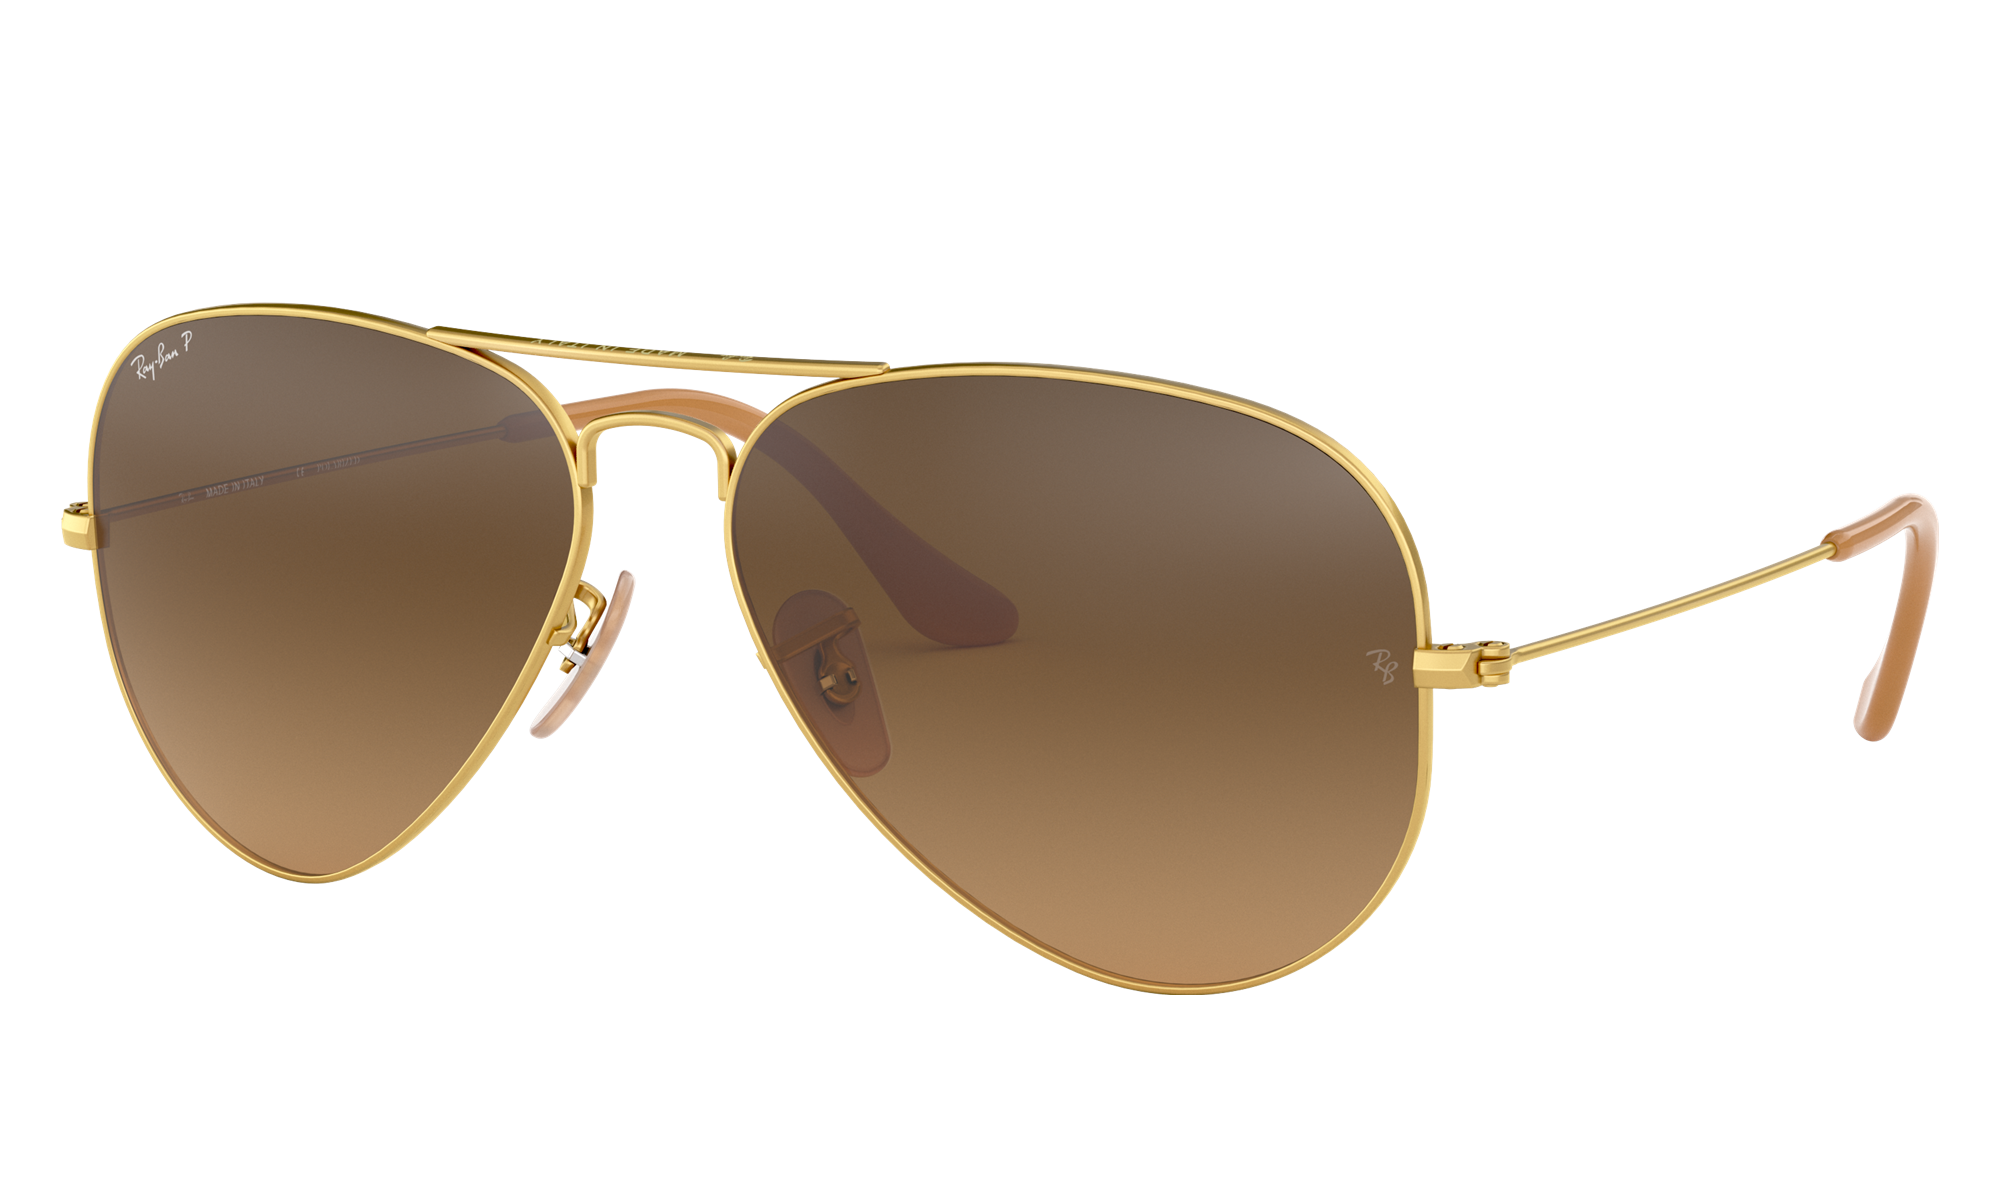 Ray-Ban Unisex Rb3025 Gold Size: Standard